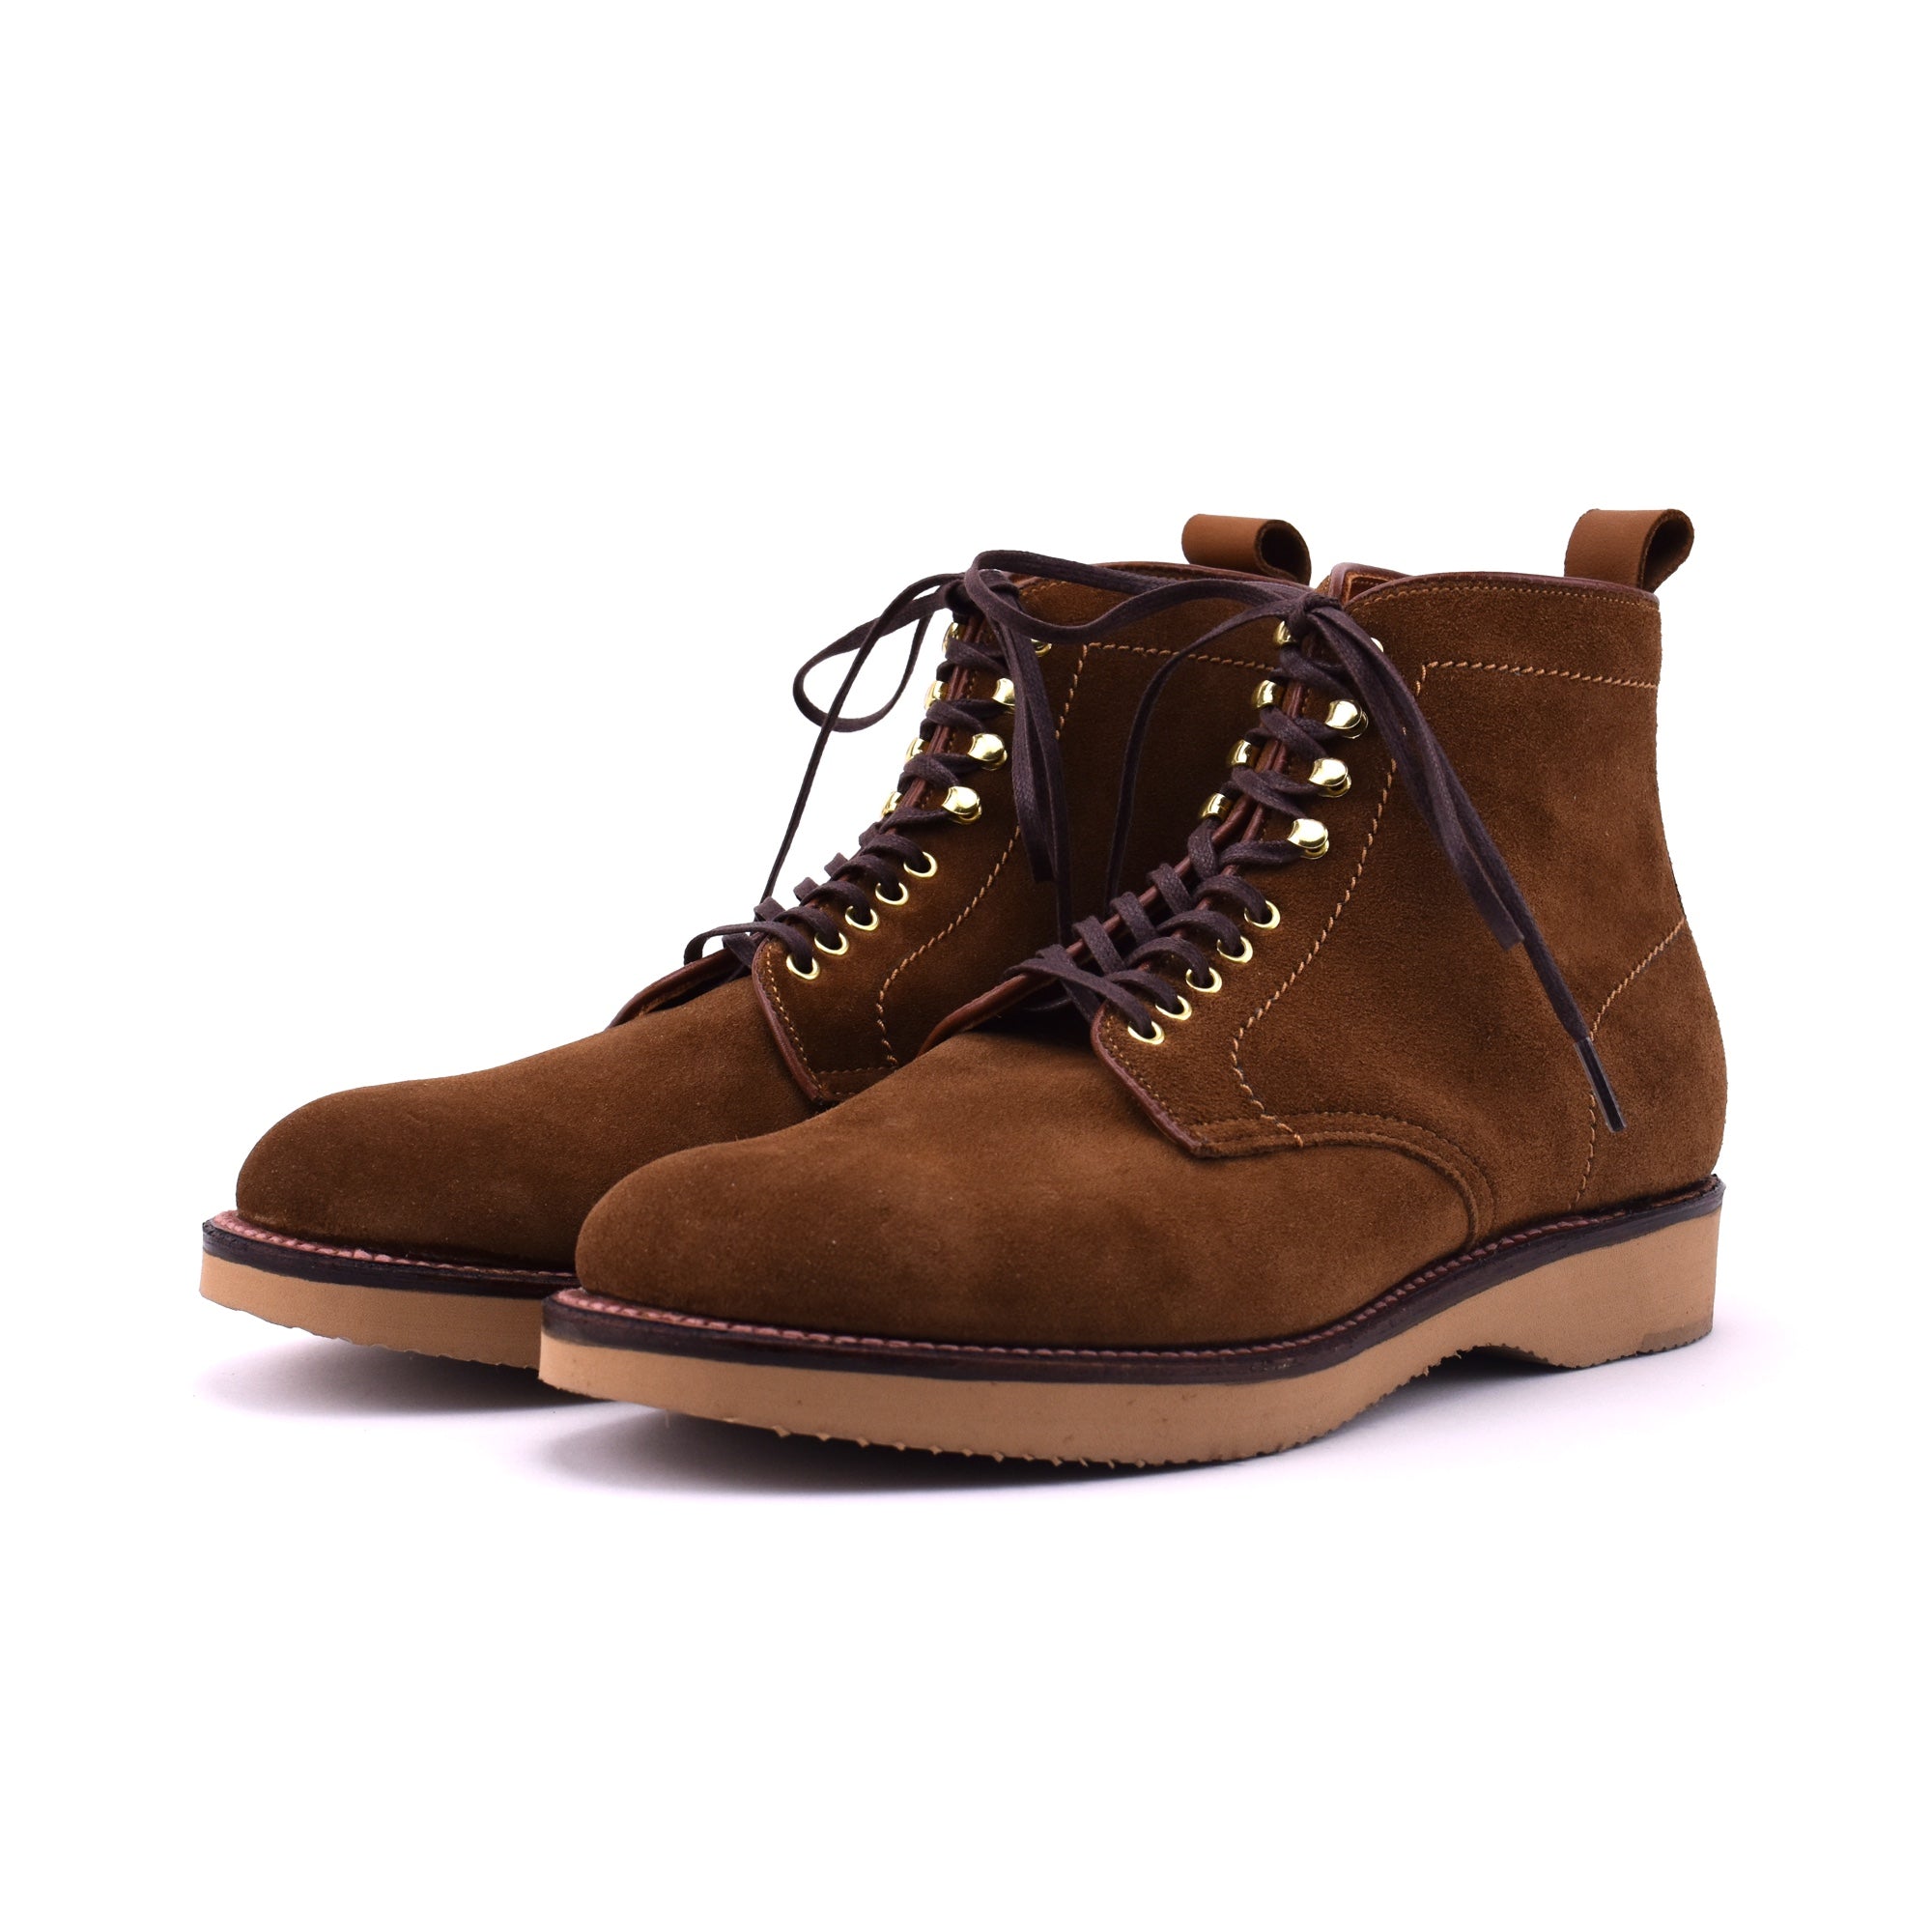 Snuff Suede Plain Toe Boot on Wedge Sole